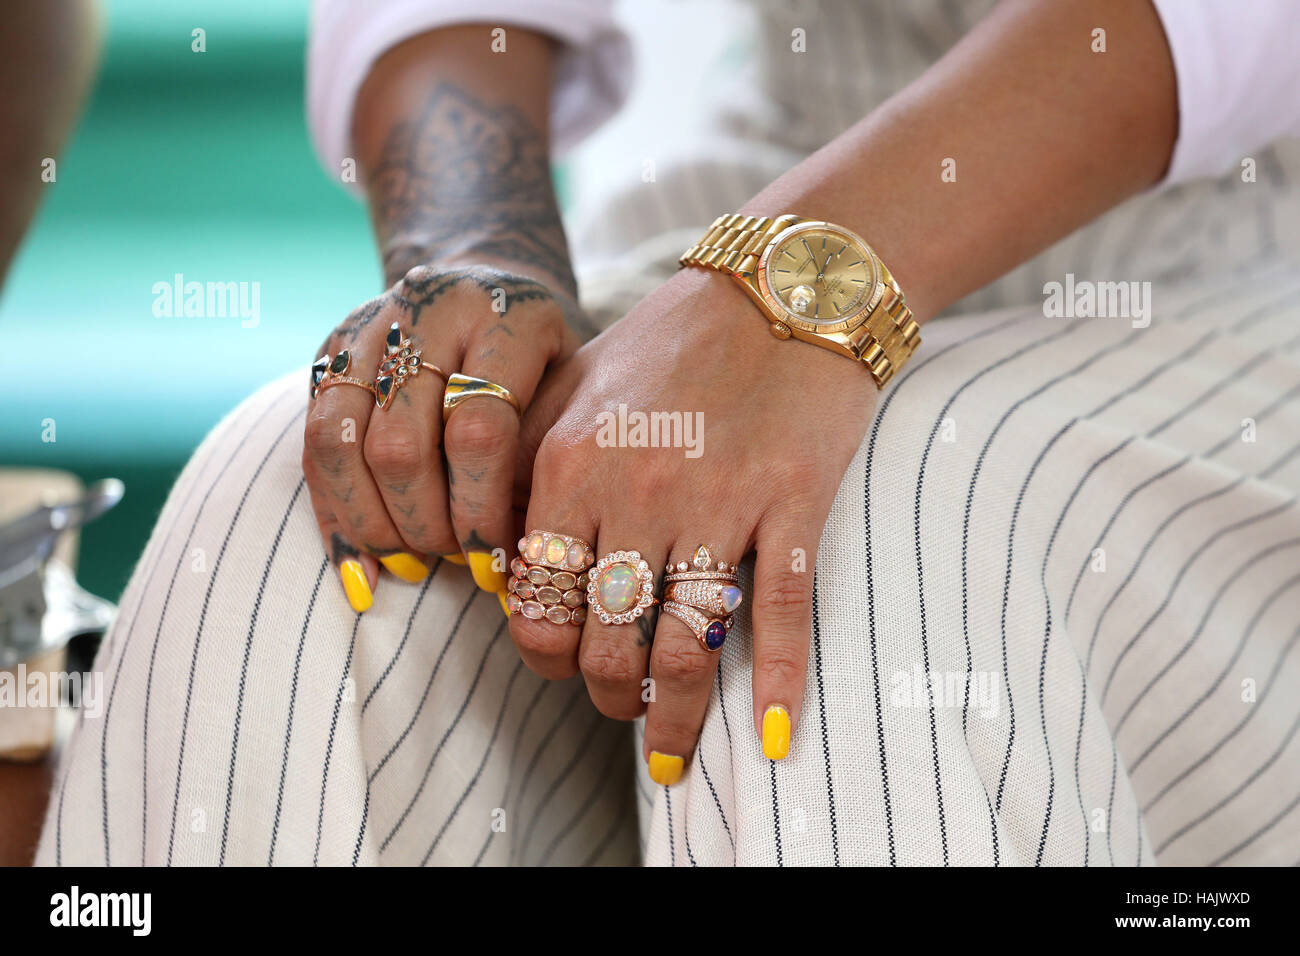 a-close-up-view-of-rihannas-hand-after-having-her-blood-sample-taken-HAJWXD.jpg